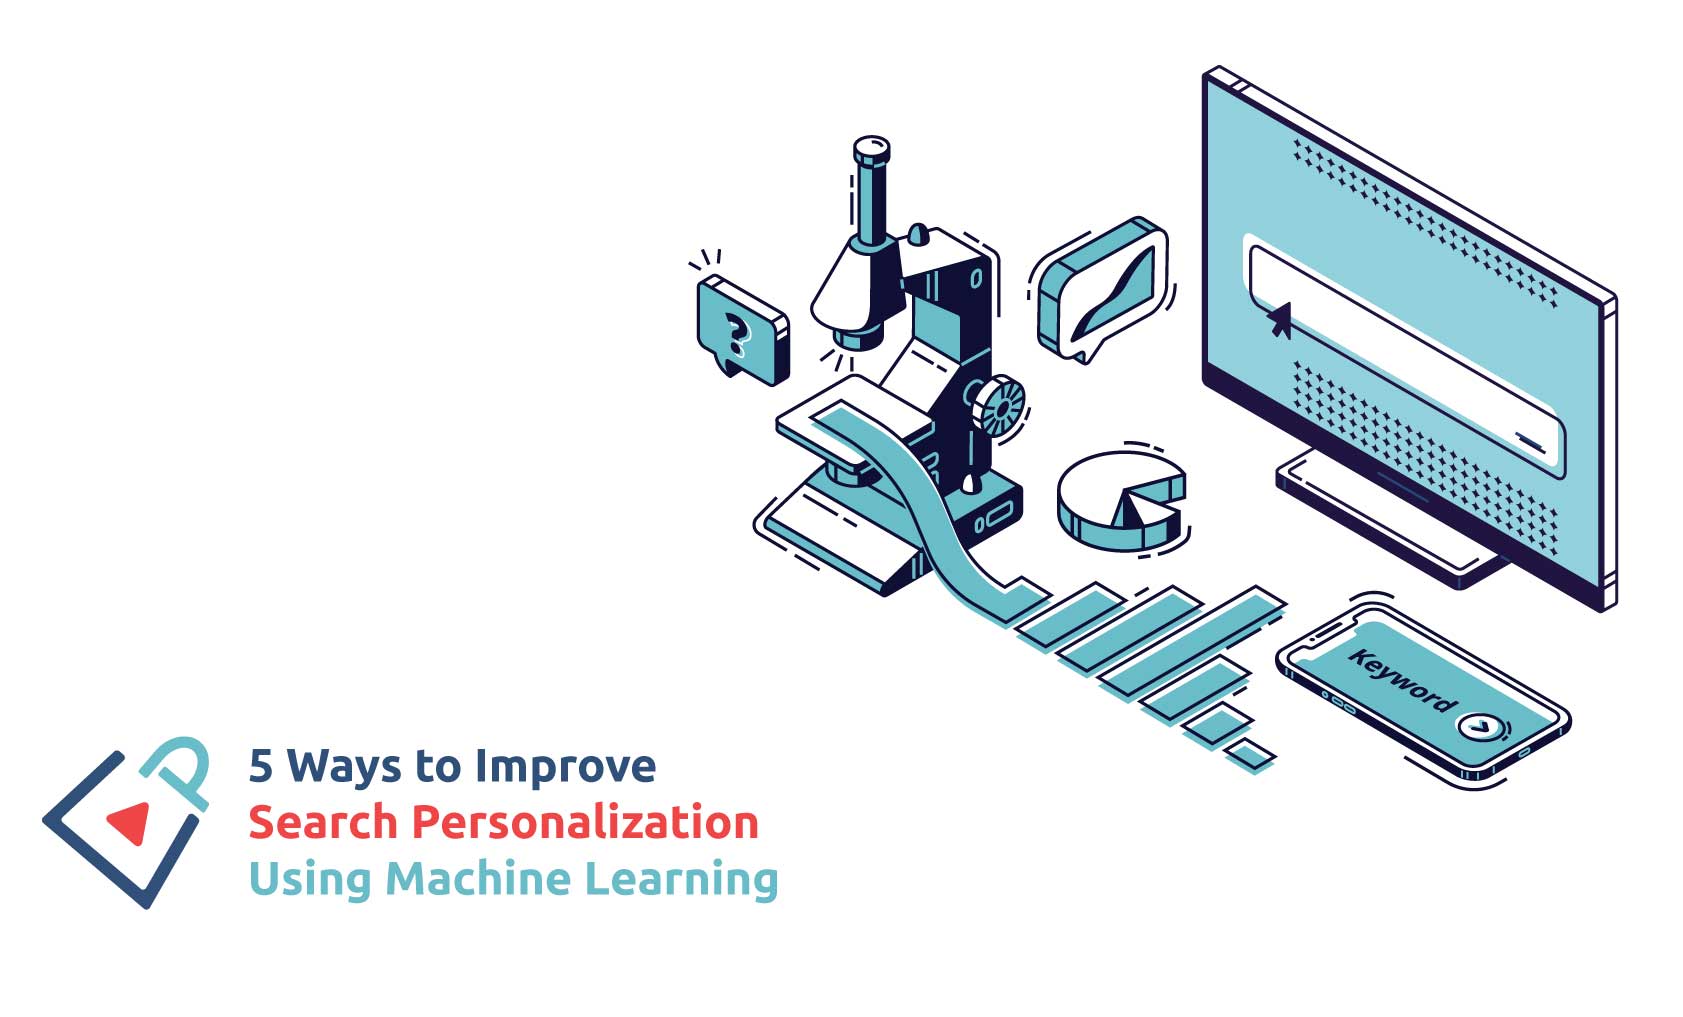 Learn 5 ways to improve search personalization using machine learning in this blog.